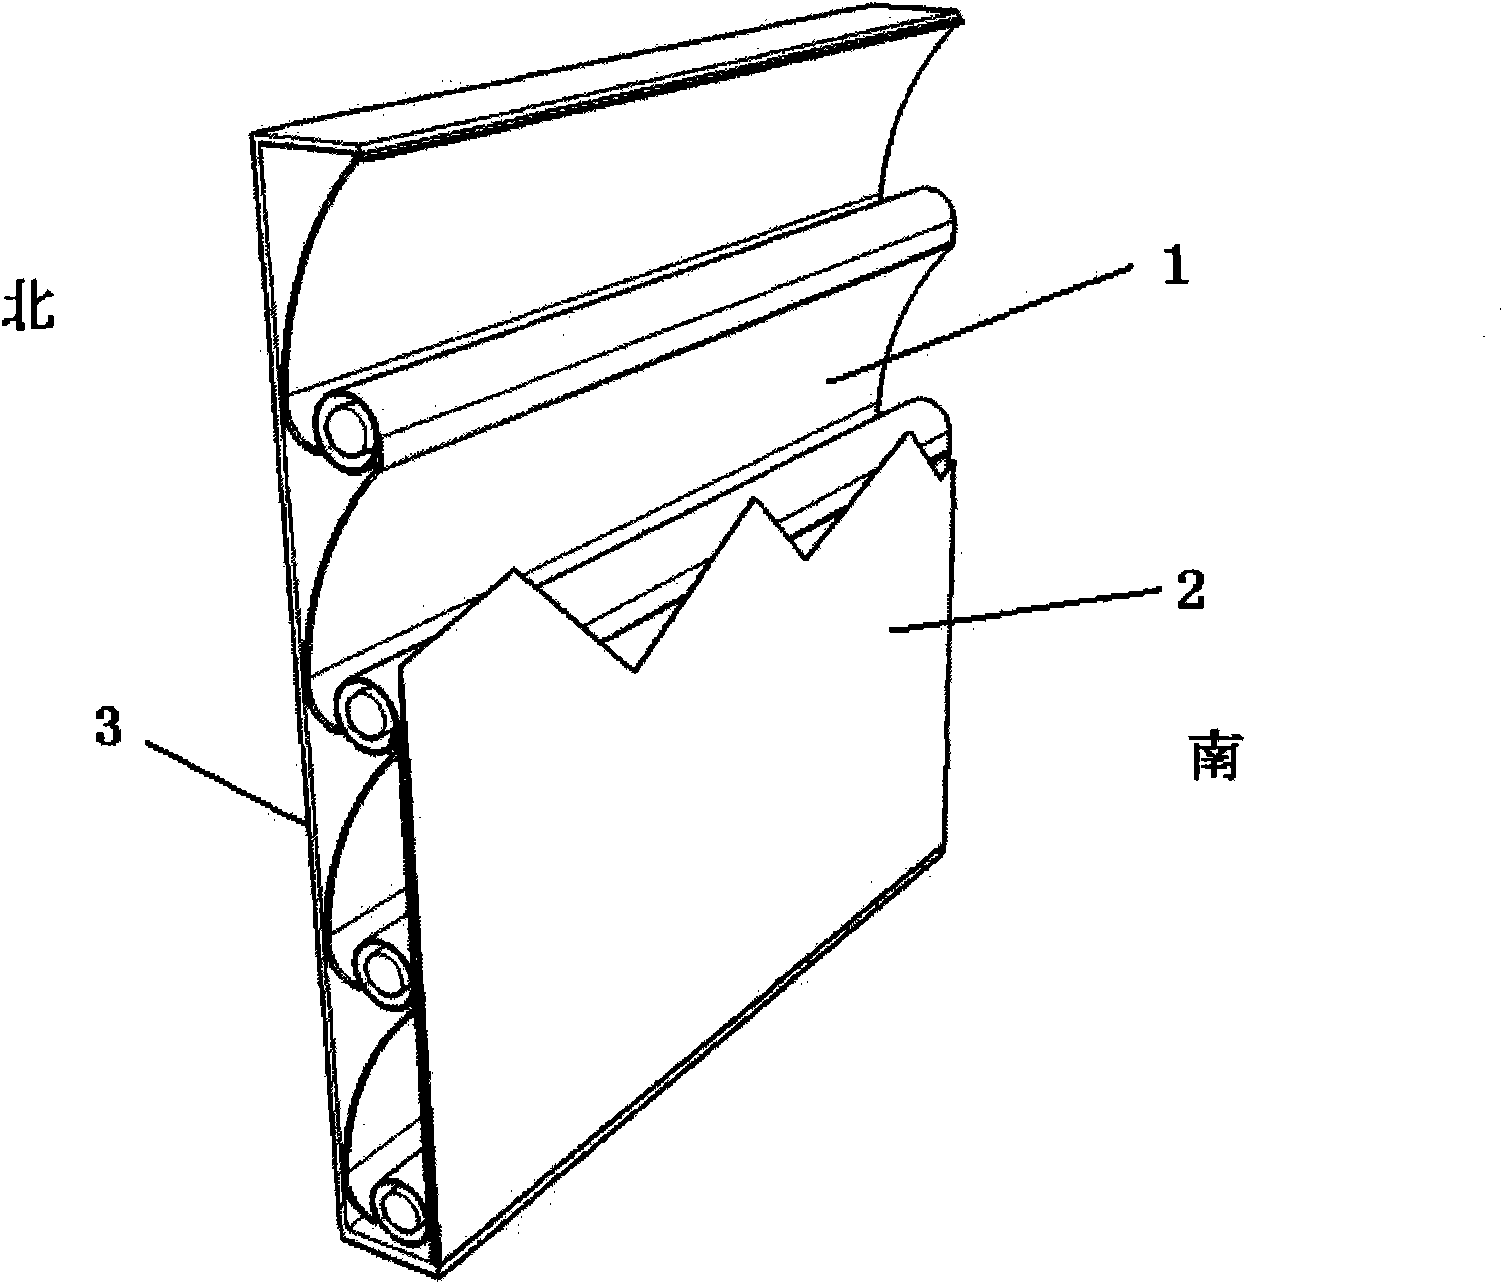 Wall-hanging-type heat collector adopting half-edge compound parabolic concentrating devices